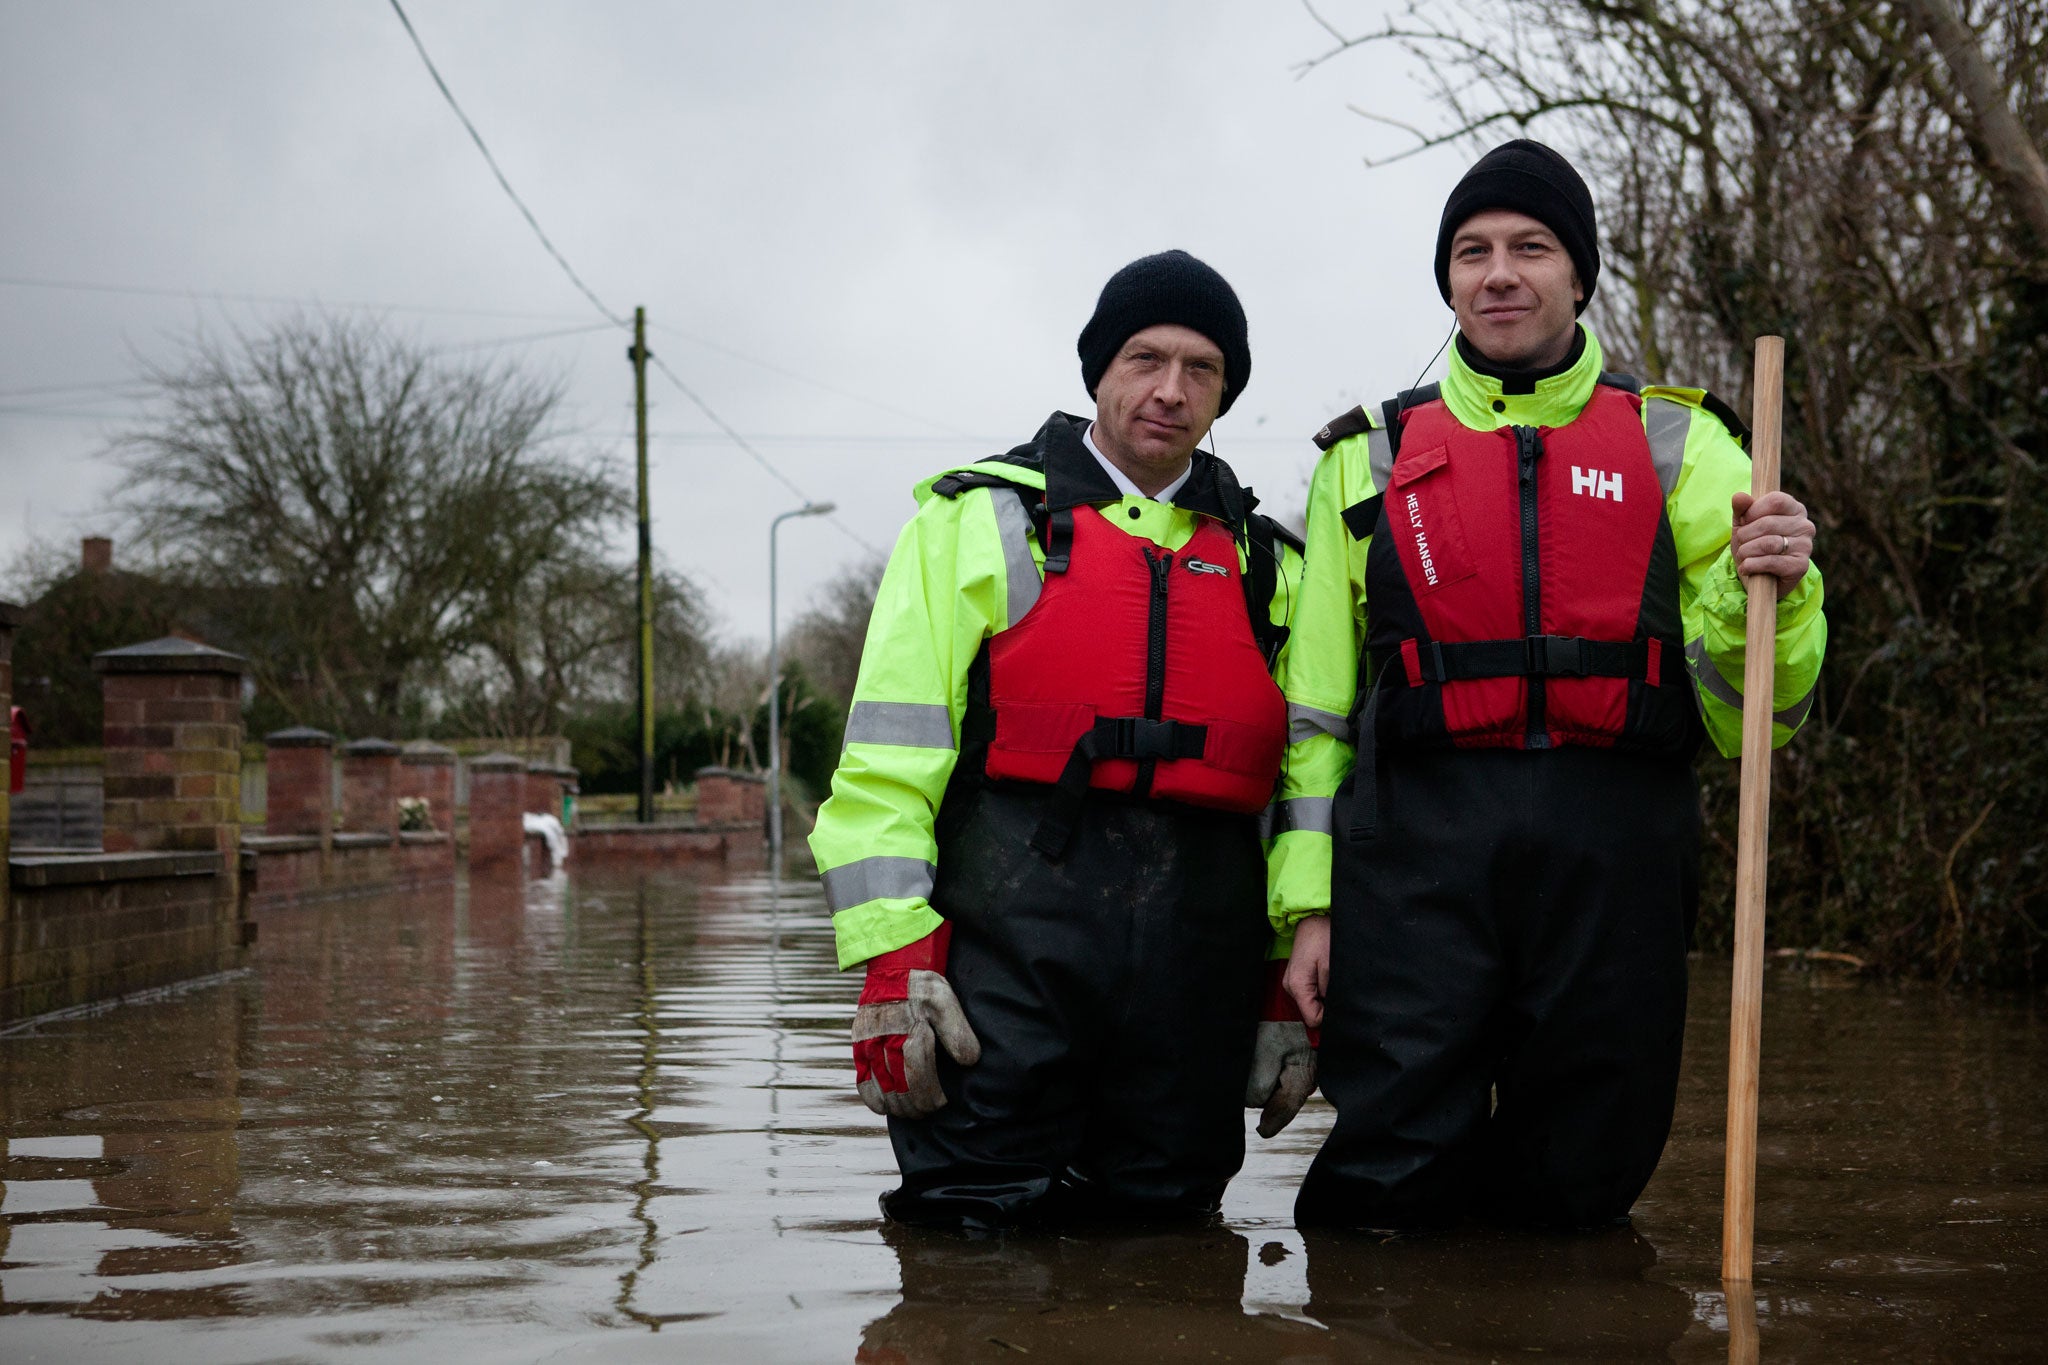 Members of the Avon and Somerset Police visit people still living in their flooded homes